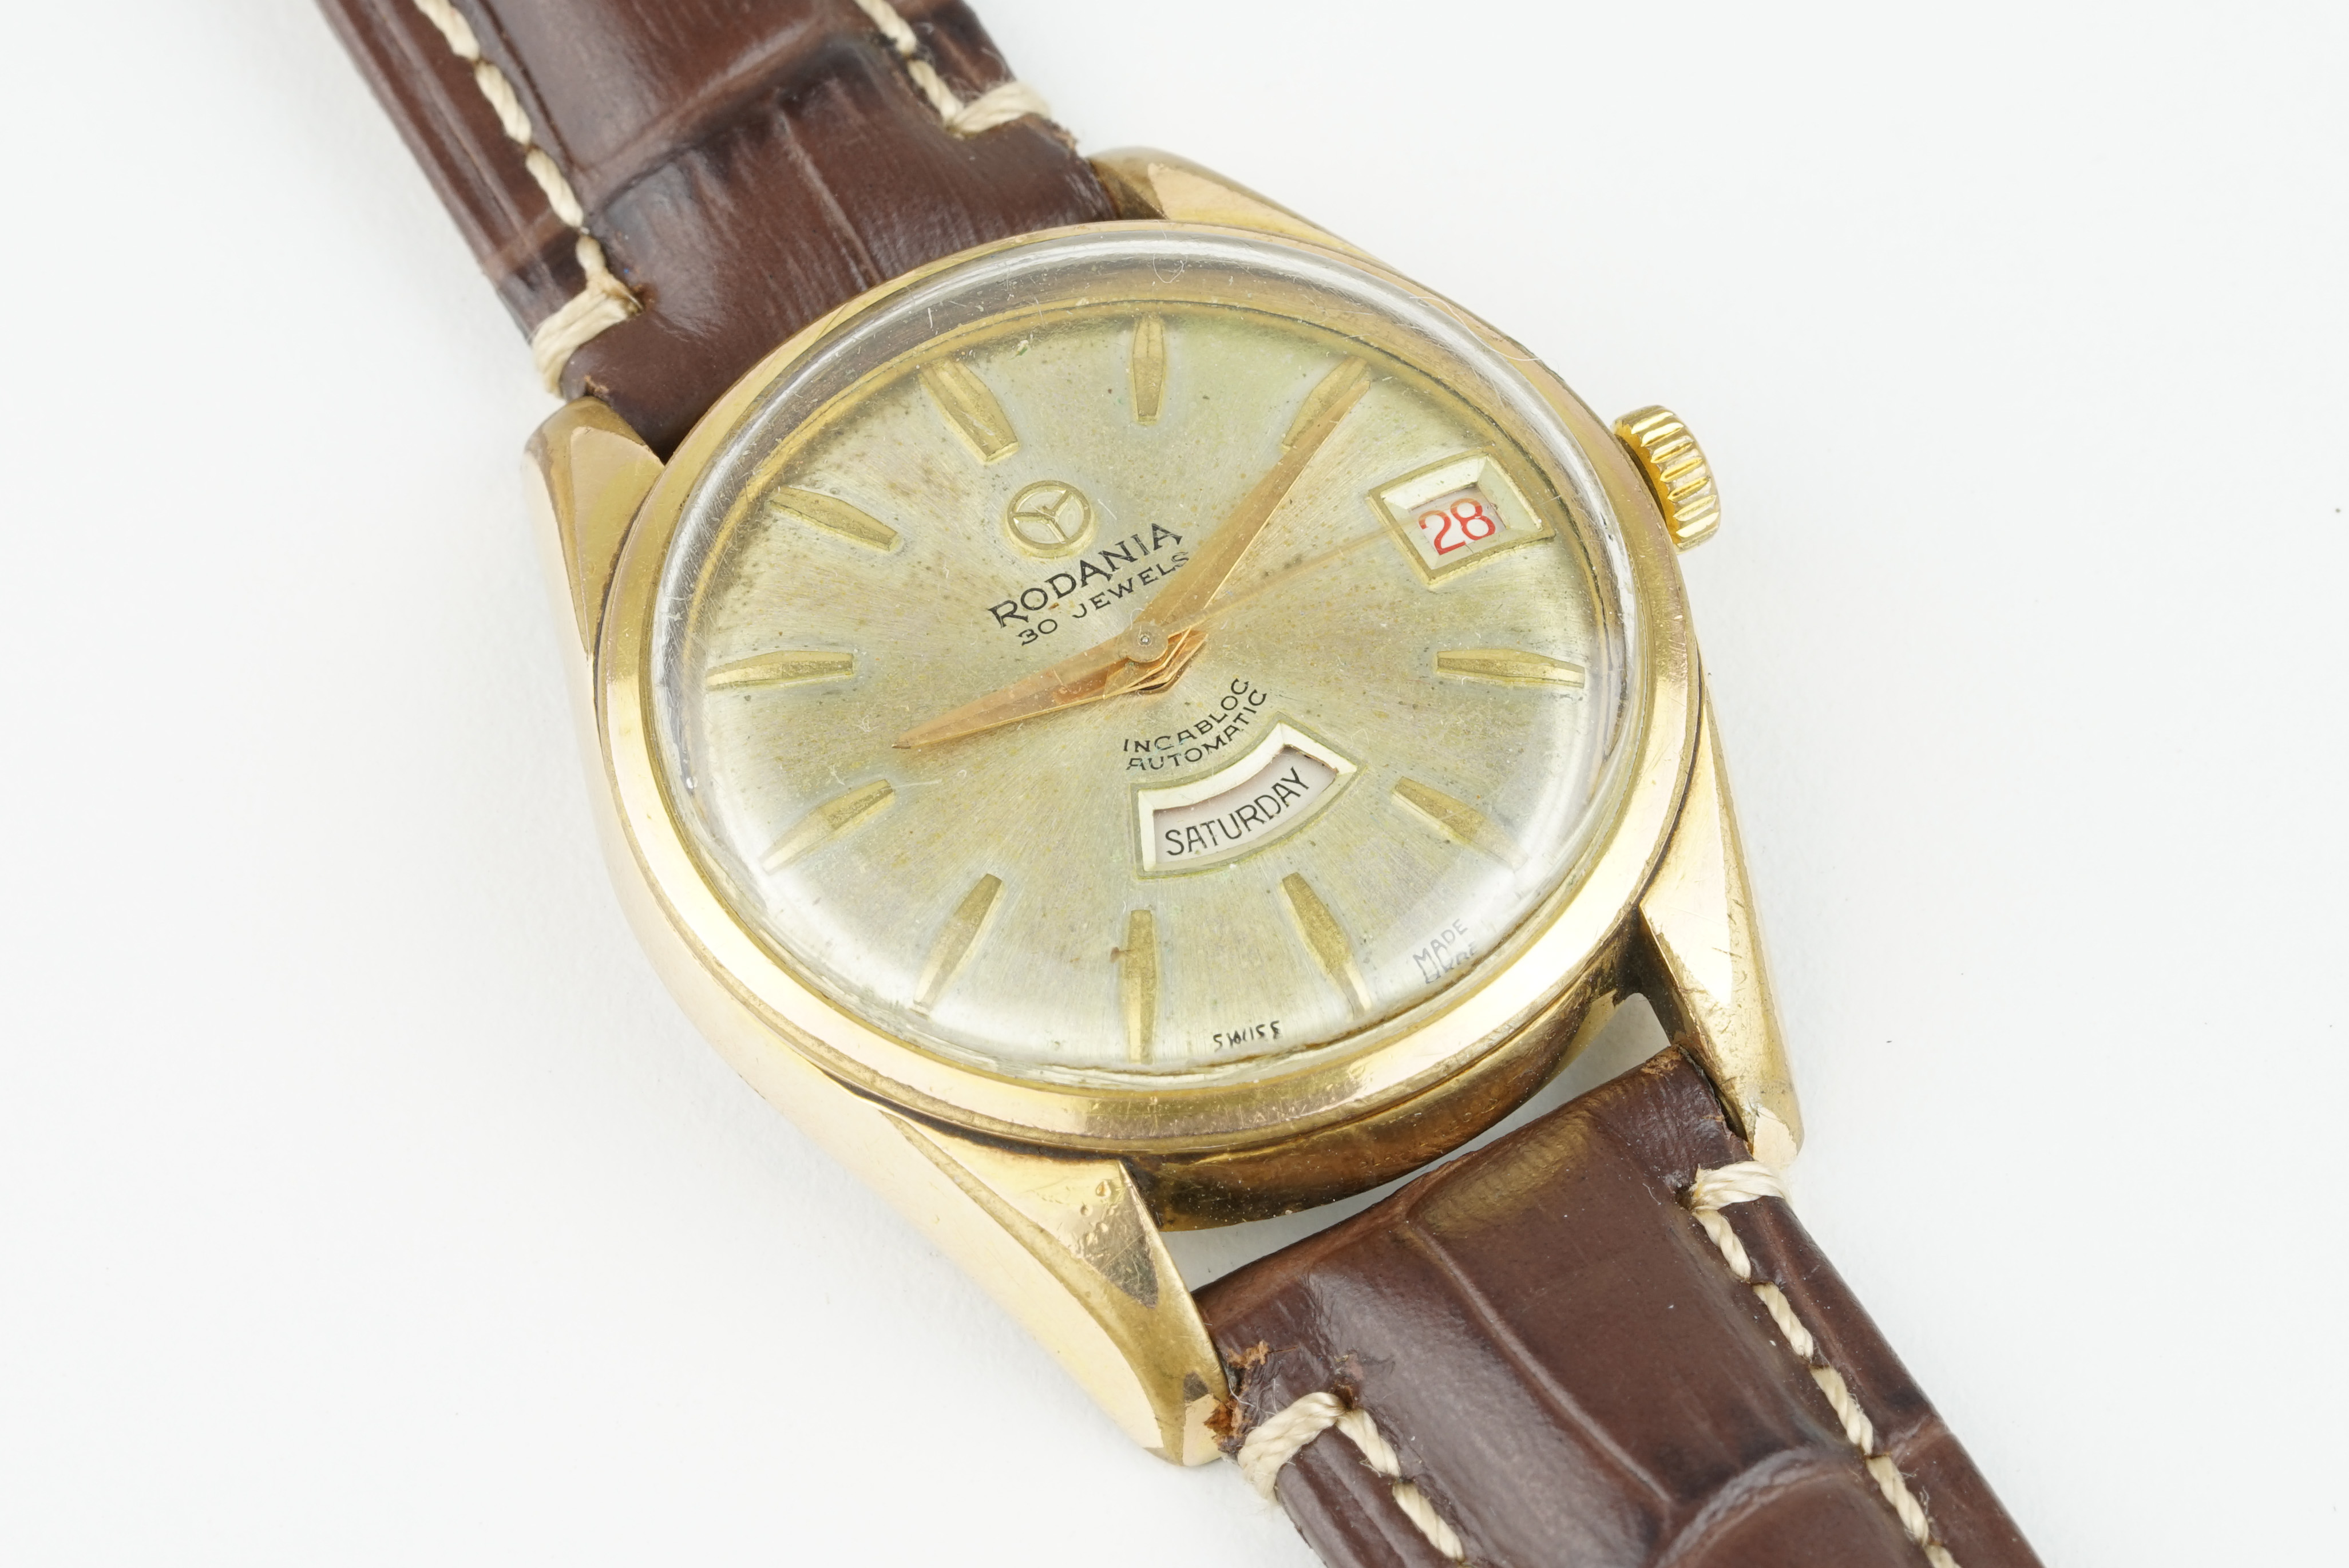 RODANIA AUTOMATIC DAY DATE WRISTWATCH, circular gold dial with hour markers and hands, day date